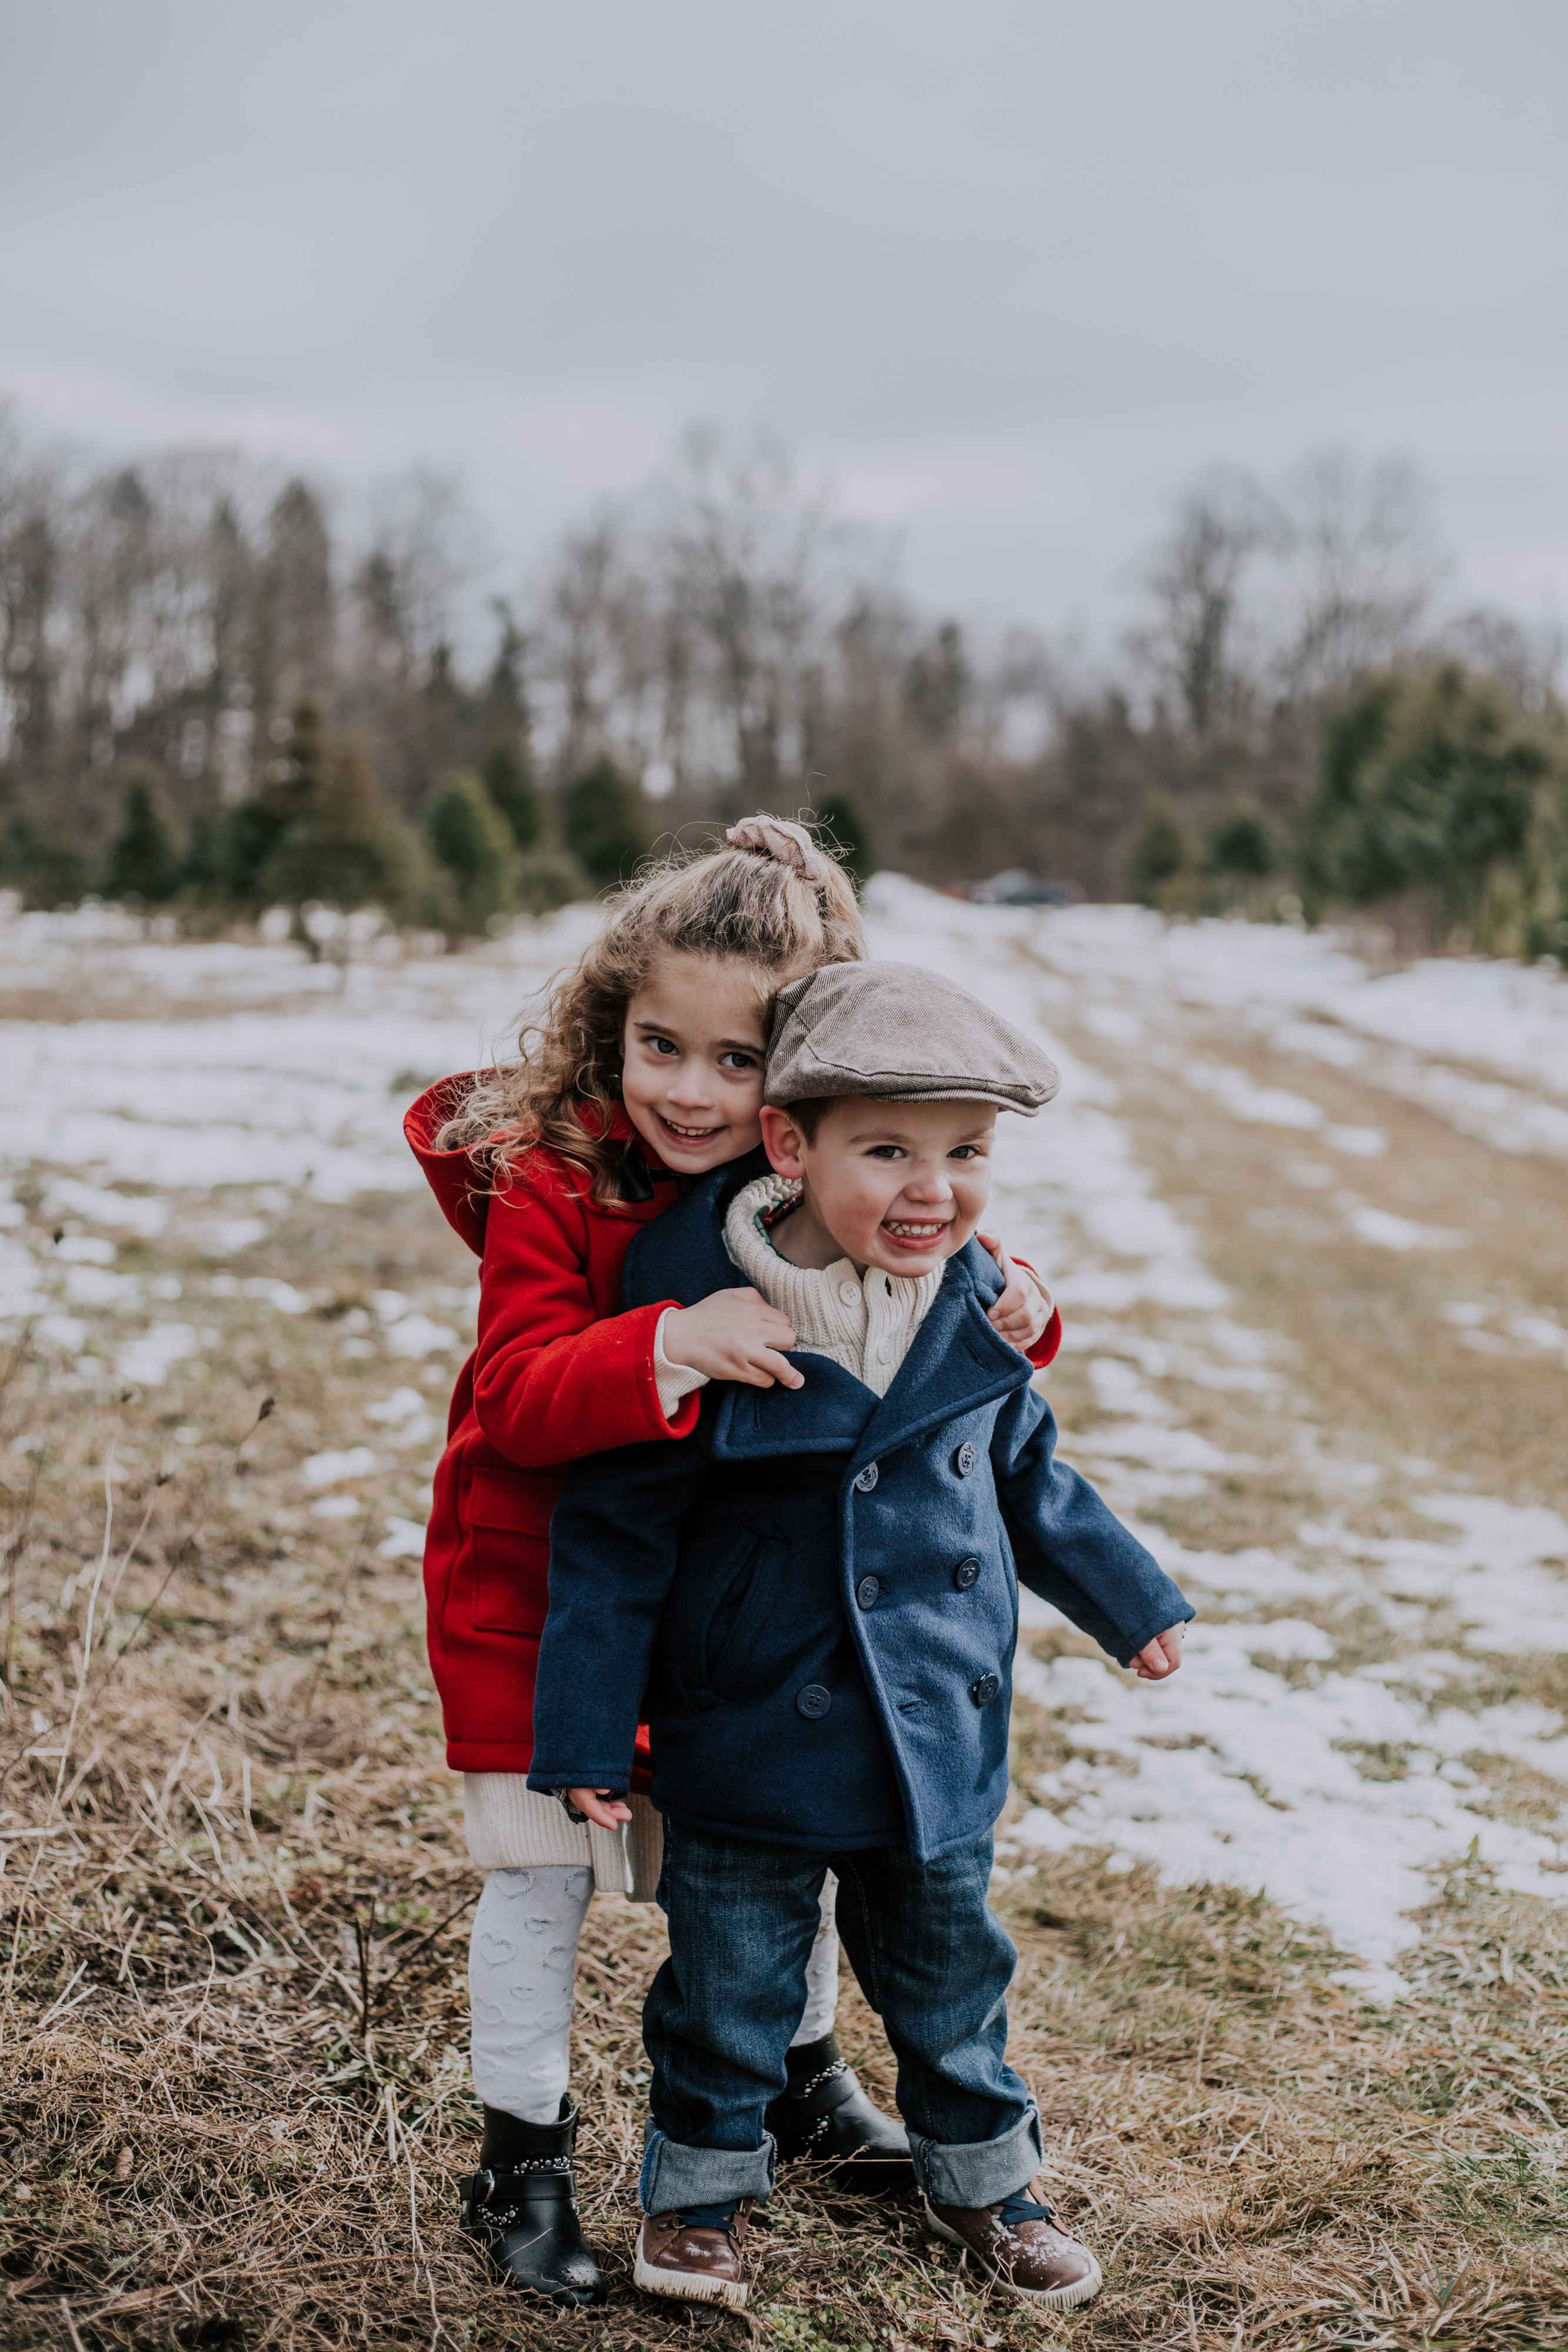 a young girl hugs her toddler brother from behind in a grassy and snowy field